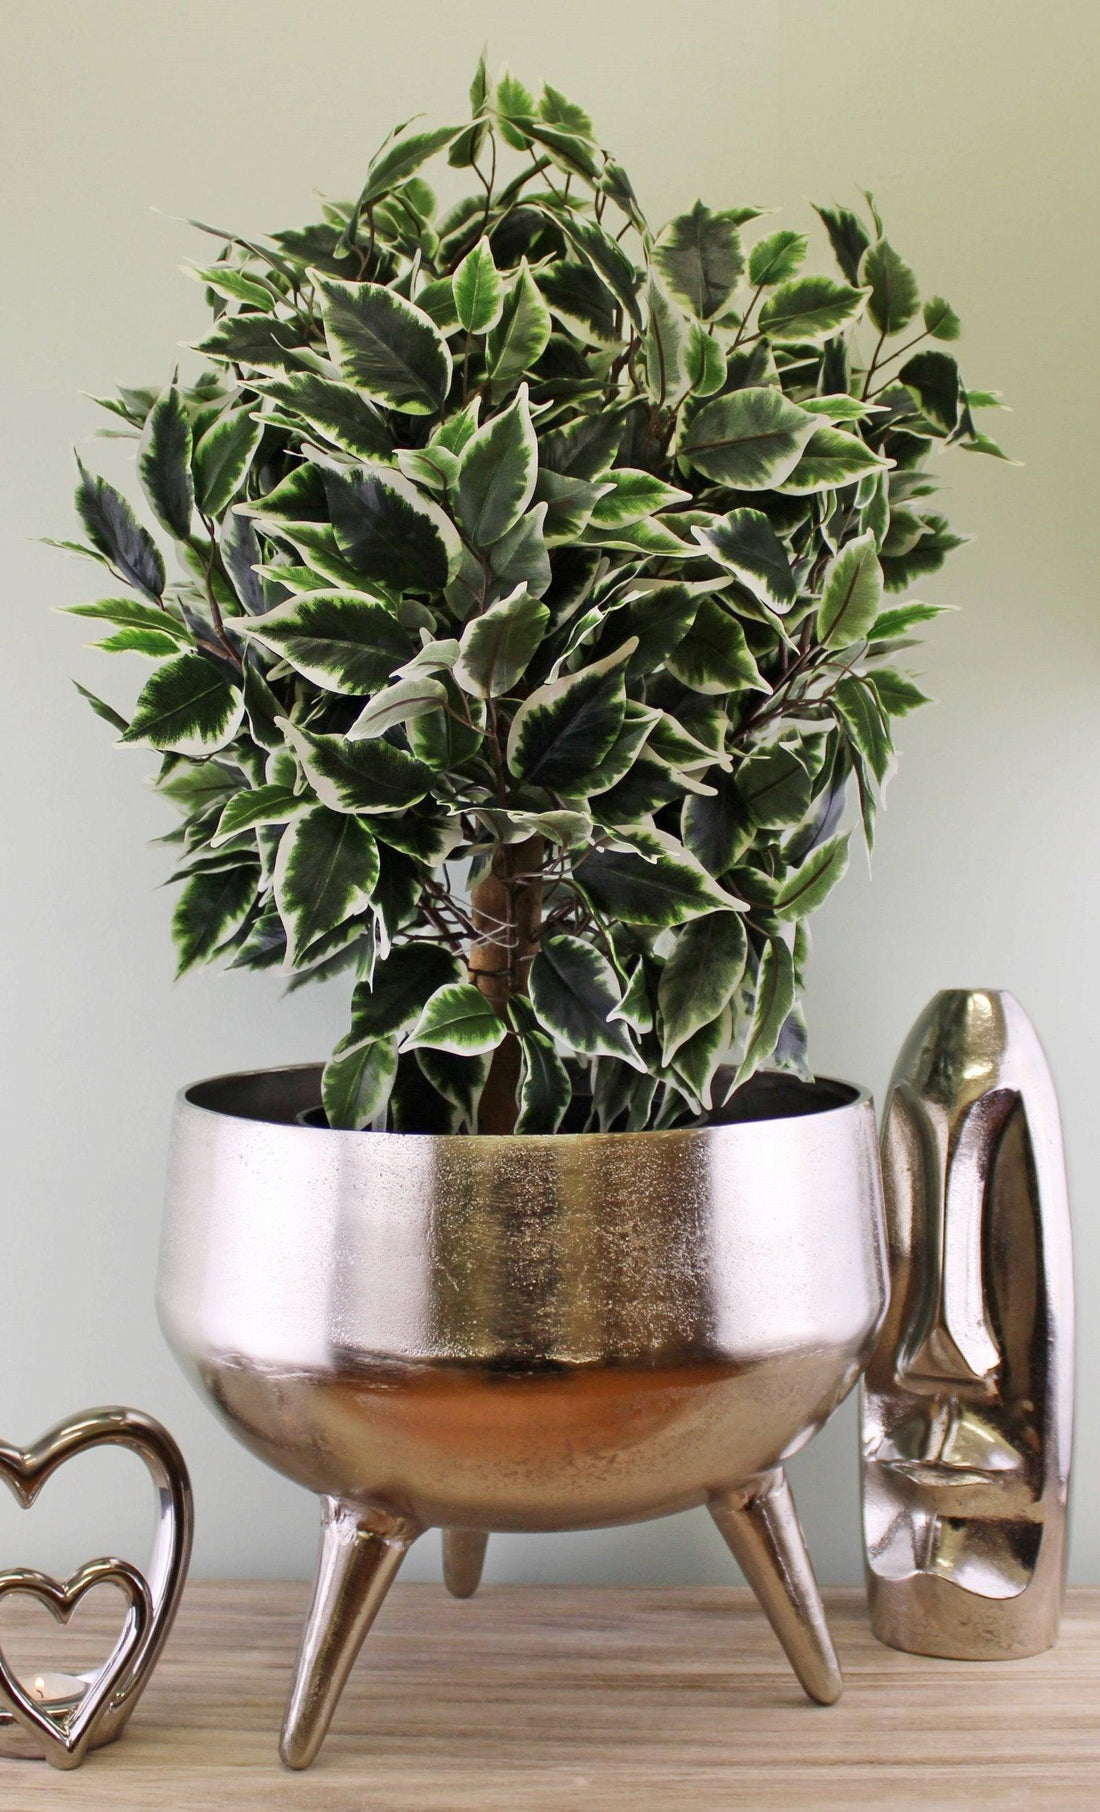 Silver Metal Planter/Bowl With Feet, 35cm - £146.99 - Planters, Vases & Plant Stands 